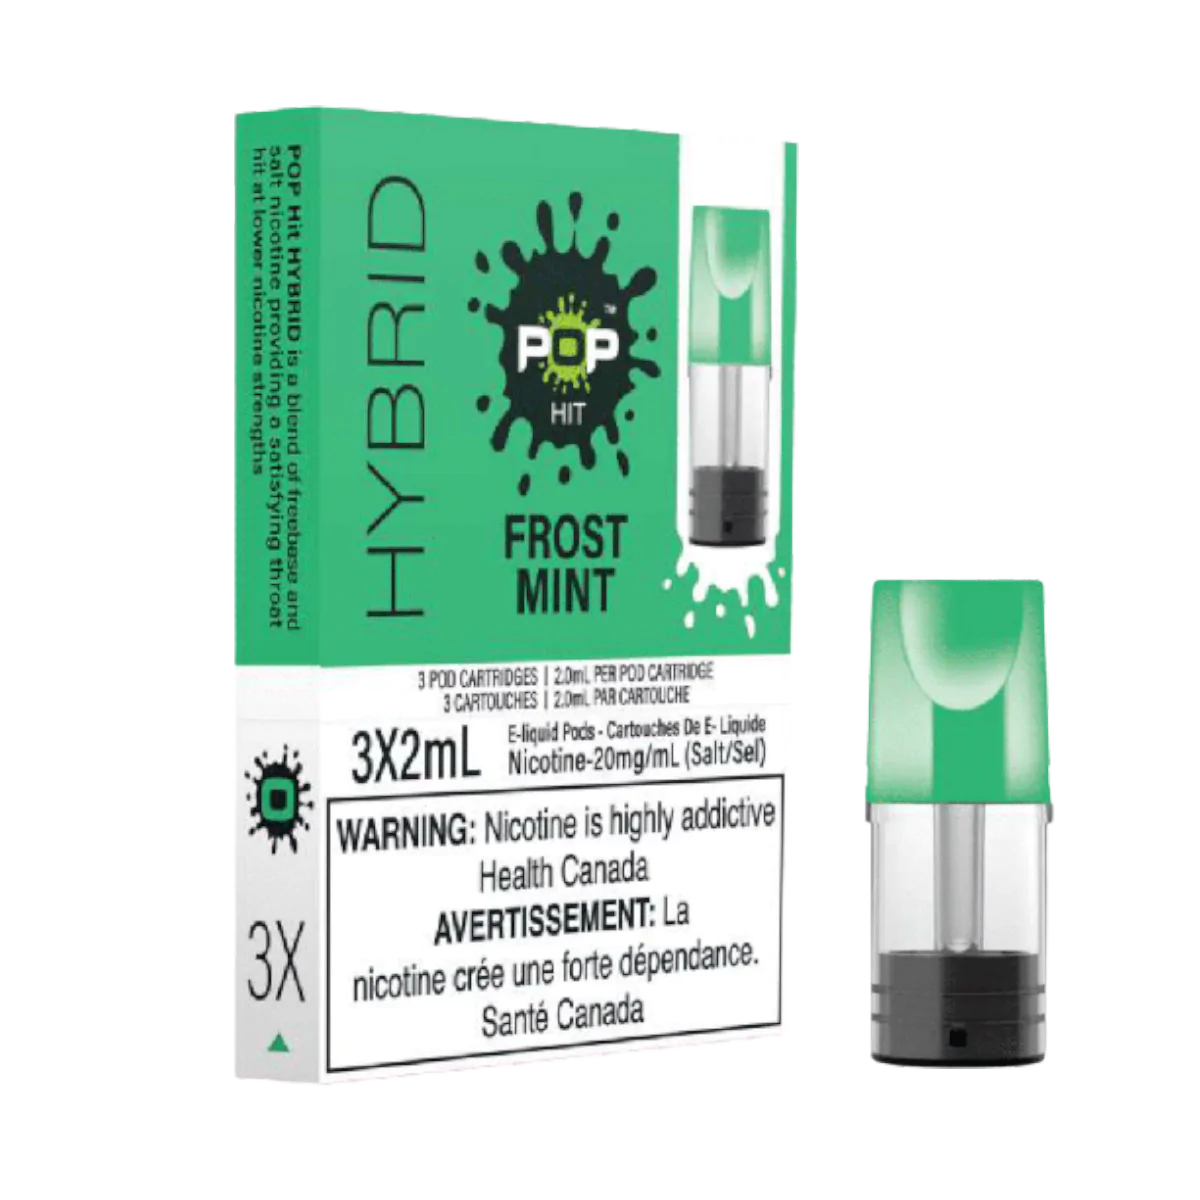 Frost Mint - Pop Hit Hybrid - 20mg - 5pc/Carton - EXCISED